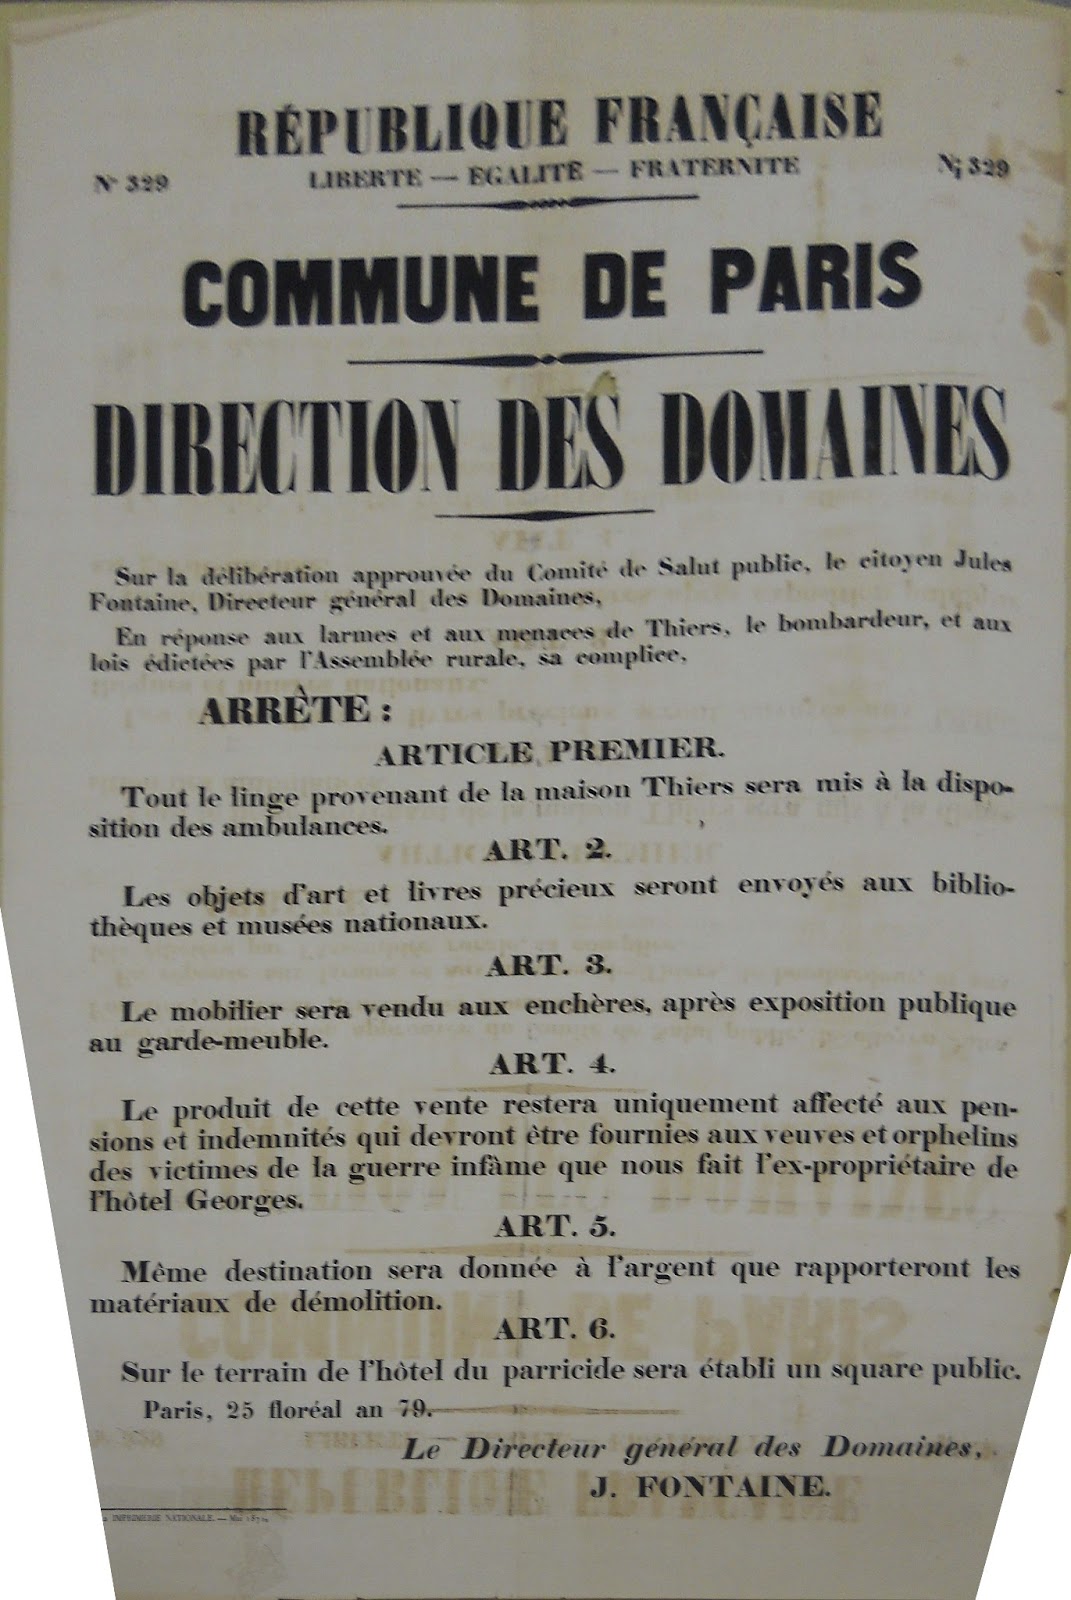 Poster with six articles detailing the plans of the Commune's leadership to confiscate the propertiy of the leader of the Versailles government.